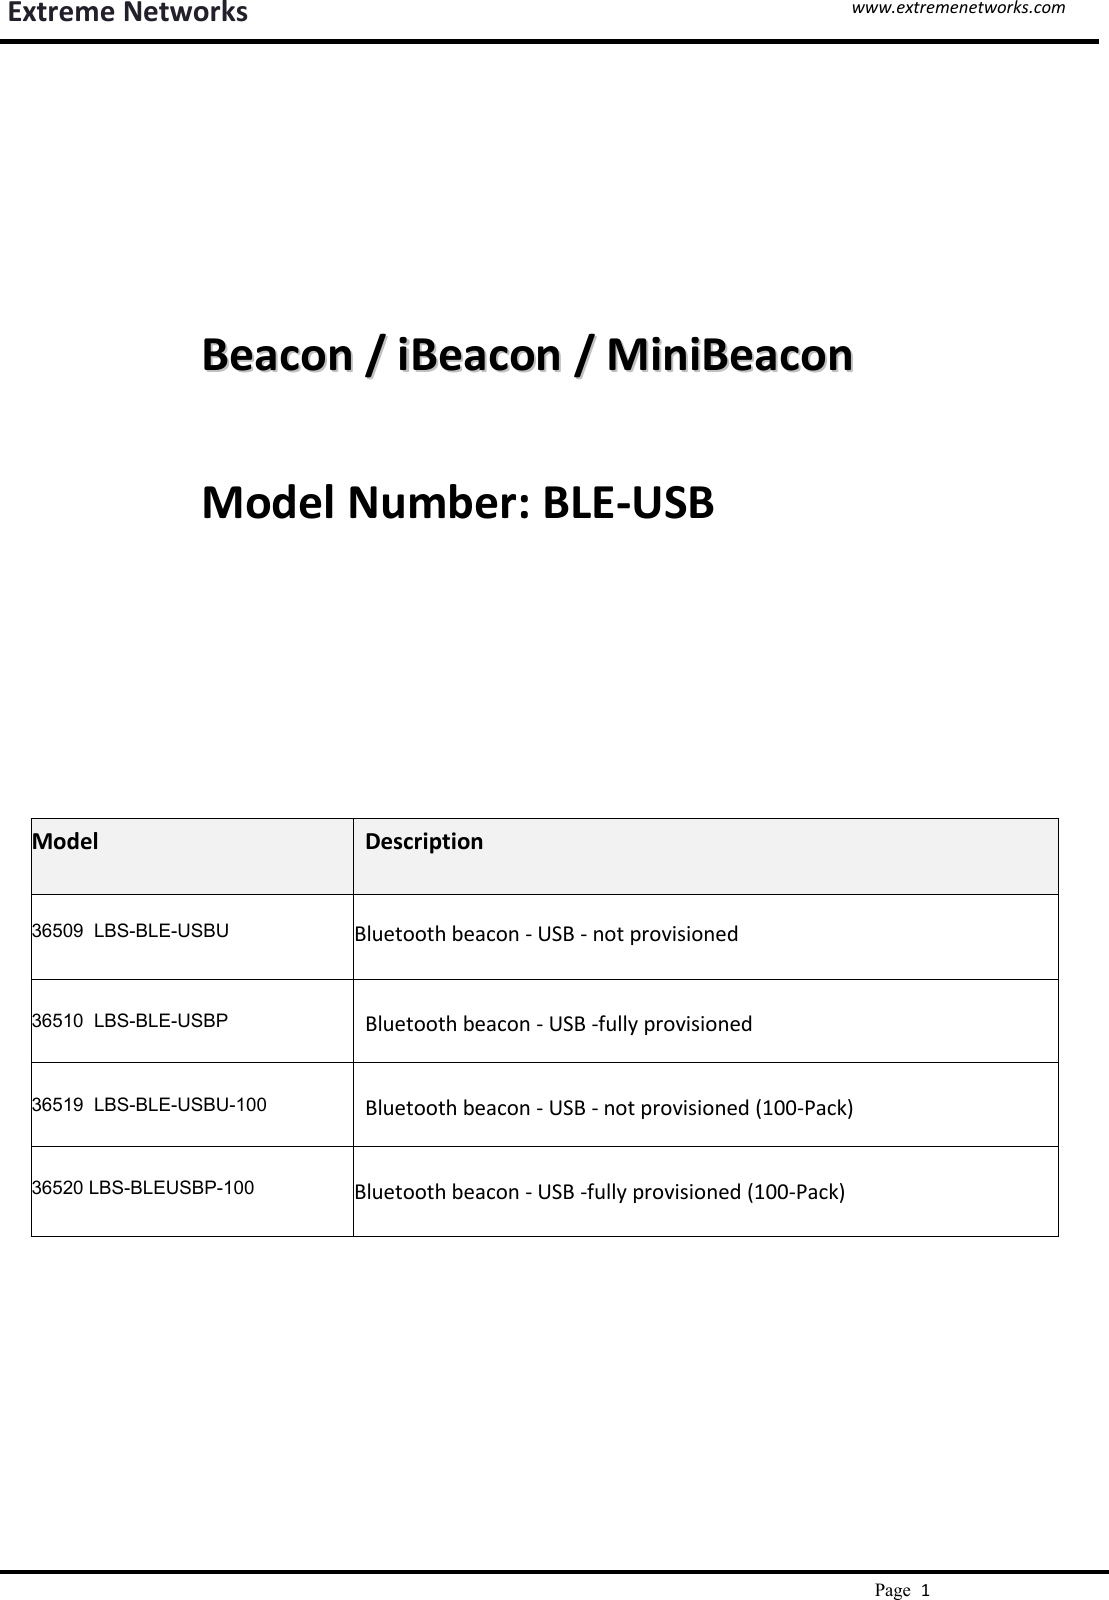 www.extremenetworks.comExtreme NetworksPage1BeaconBeacon //iBeaconiBeacon //MiniBeaconMiniBeaconModel Number: BLE-USBModelDescription36509 LBS-BLE-USBUBluetooth beacon - USB - not provisioned36510 LBS-BLE-USBPBluetooth beacon - USB -fully provisioned36519 LBS-BLE-USBU-100Bluetooth beacon - USB - not provisioned (100-Pack)36520 LBS-BLEUSBP-100Bluetooth beacon - USB -fully provisioned (100-Pack)